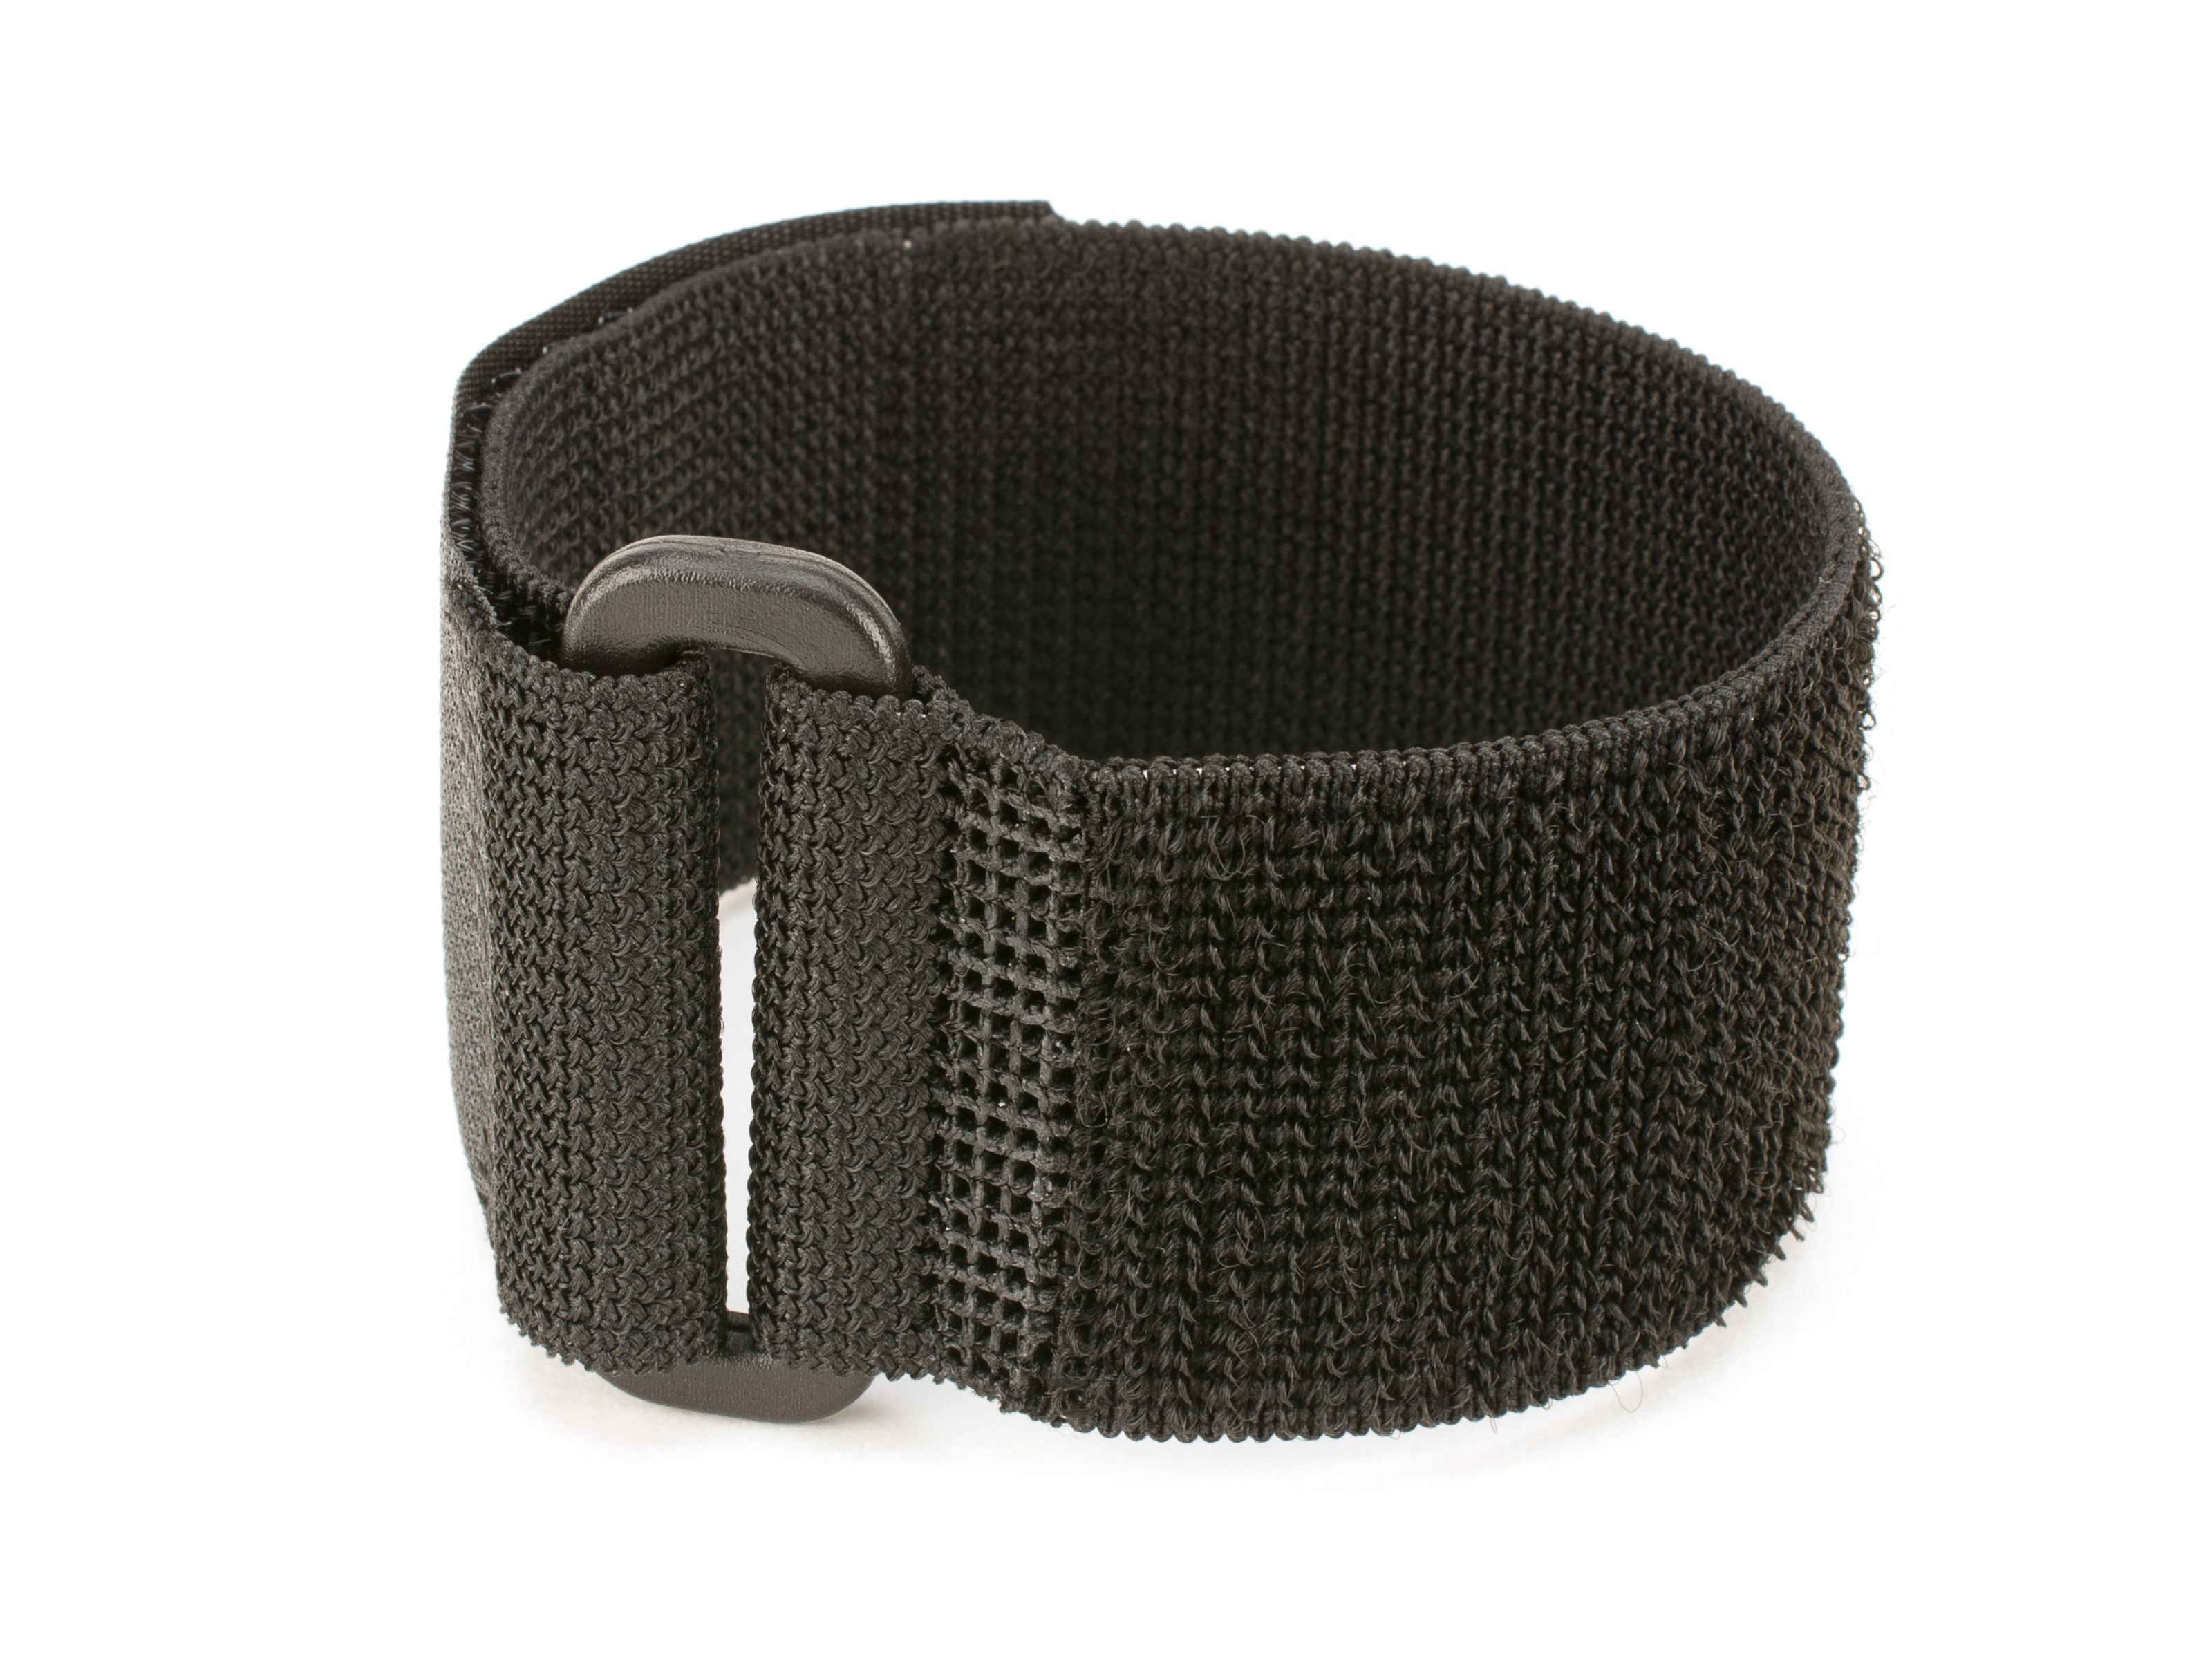 All Purpose Elastic Cinch Strap - 16 x 2 Inch - 5 Pack - Secure